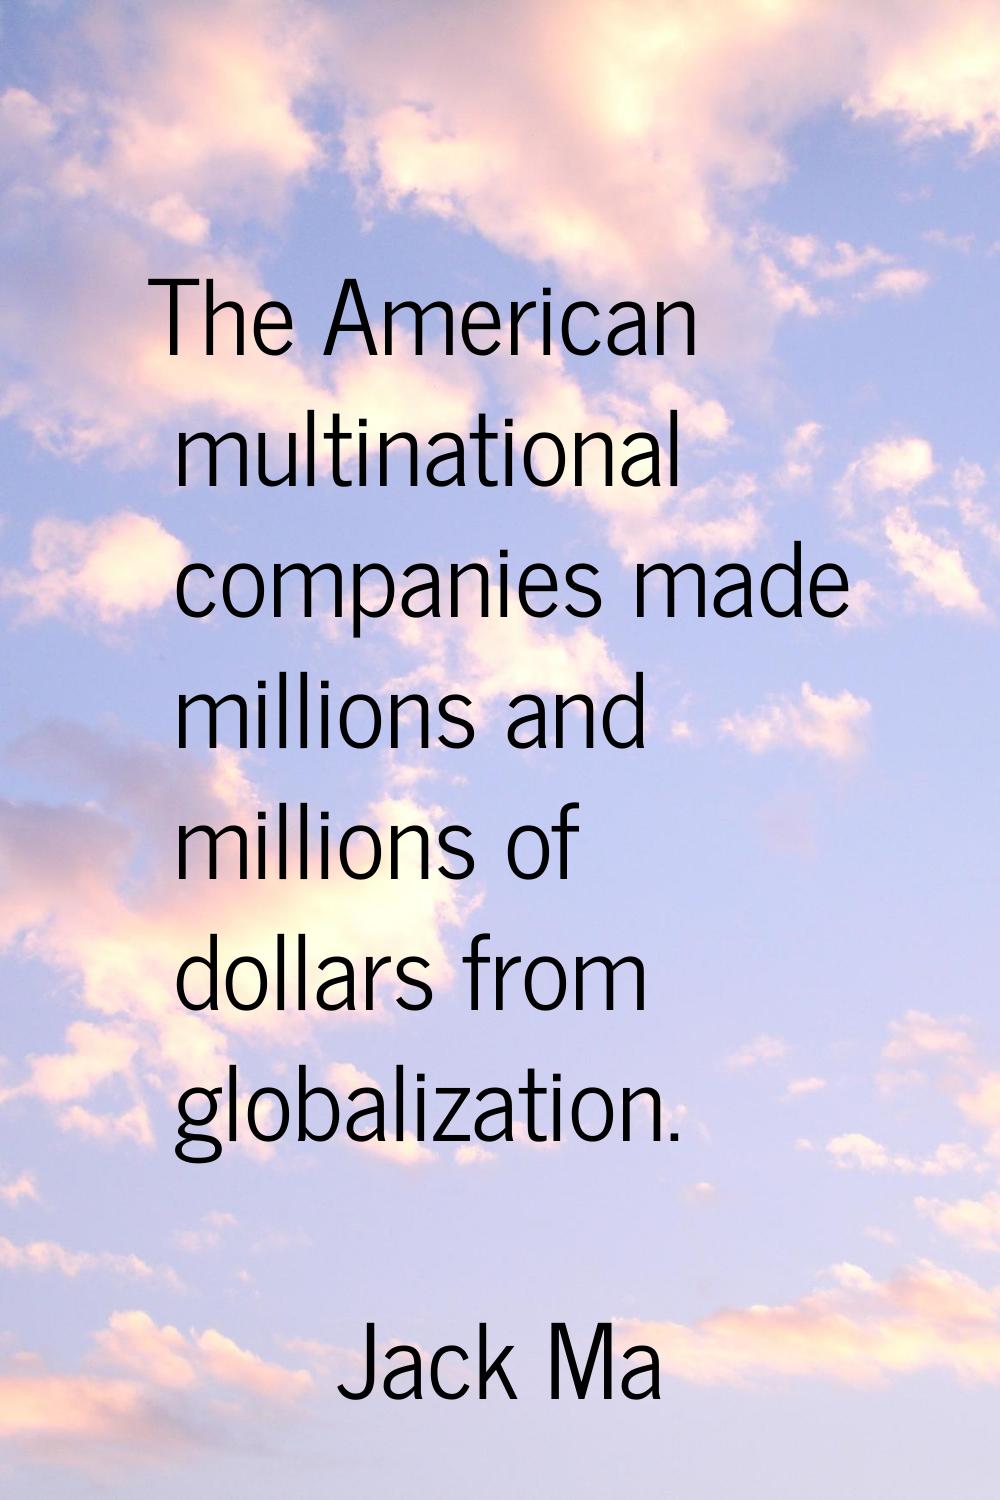 The American multinational companies made millions and millions of dollars from globalization.